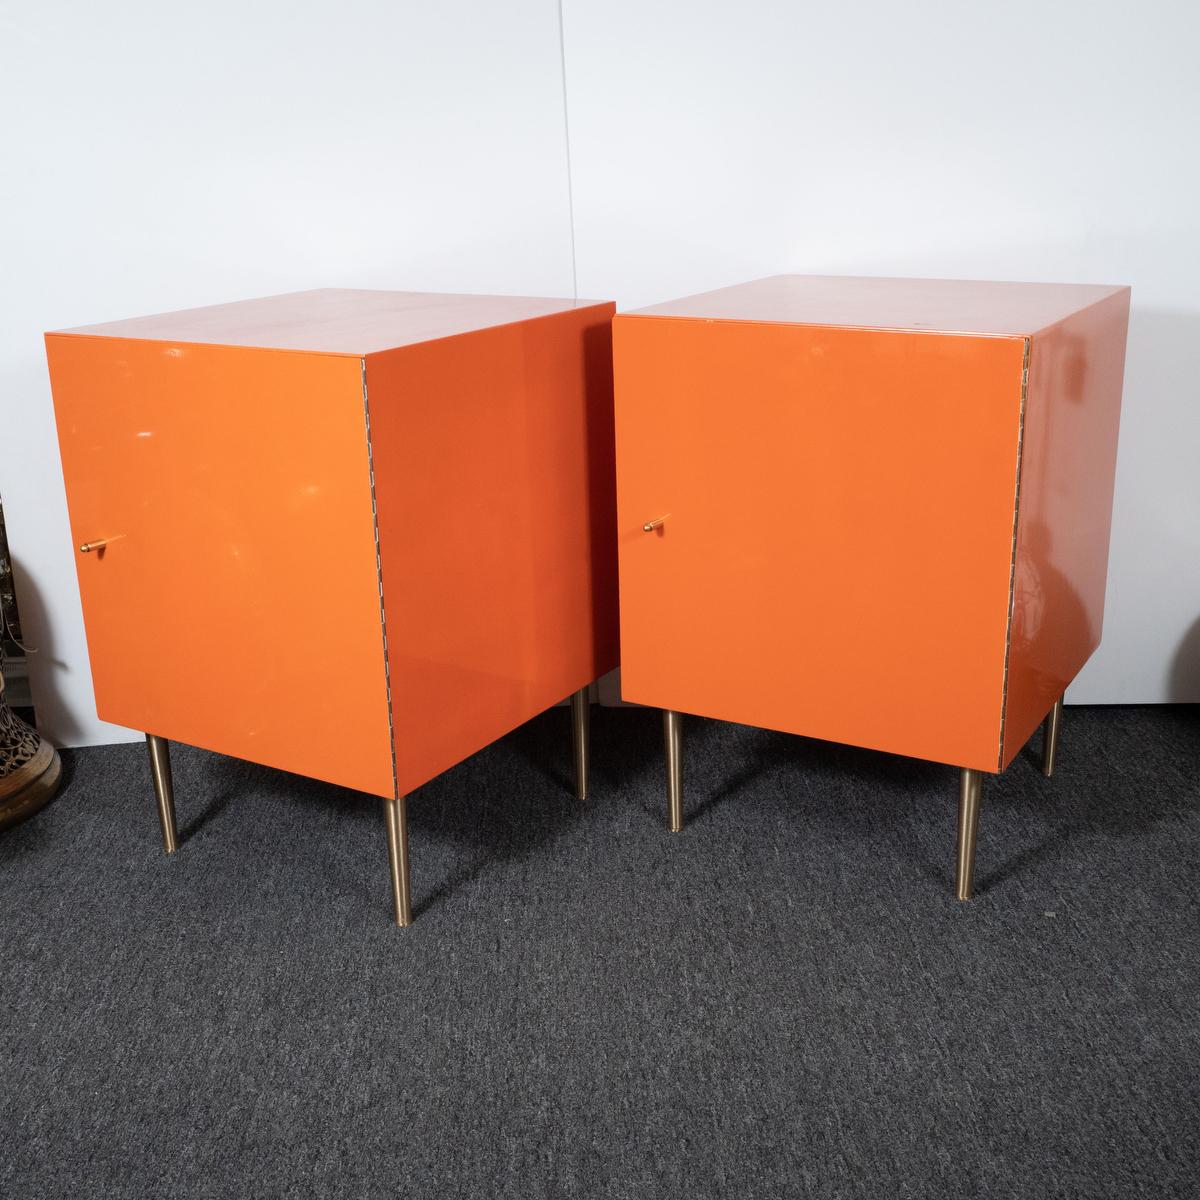 Painted Pair of Mid-Century Modern Cubic Orange Cabinets For Sale